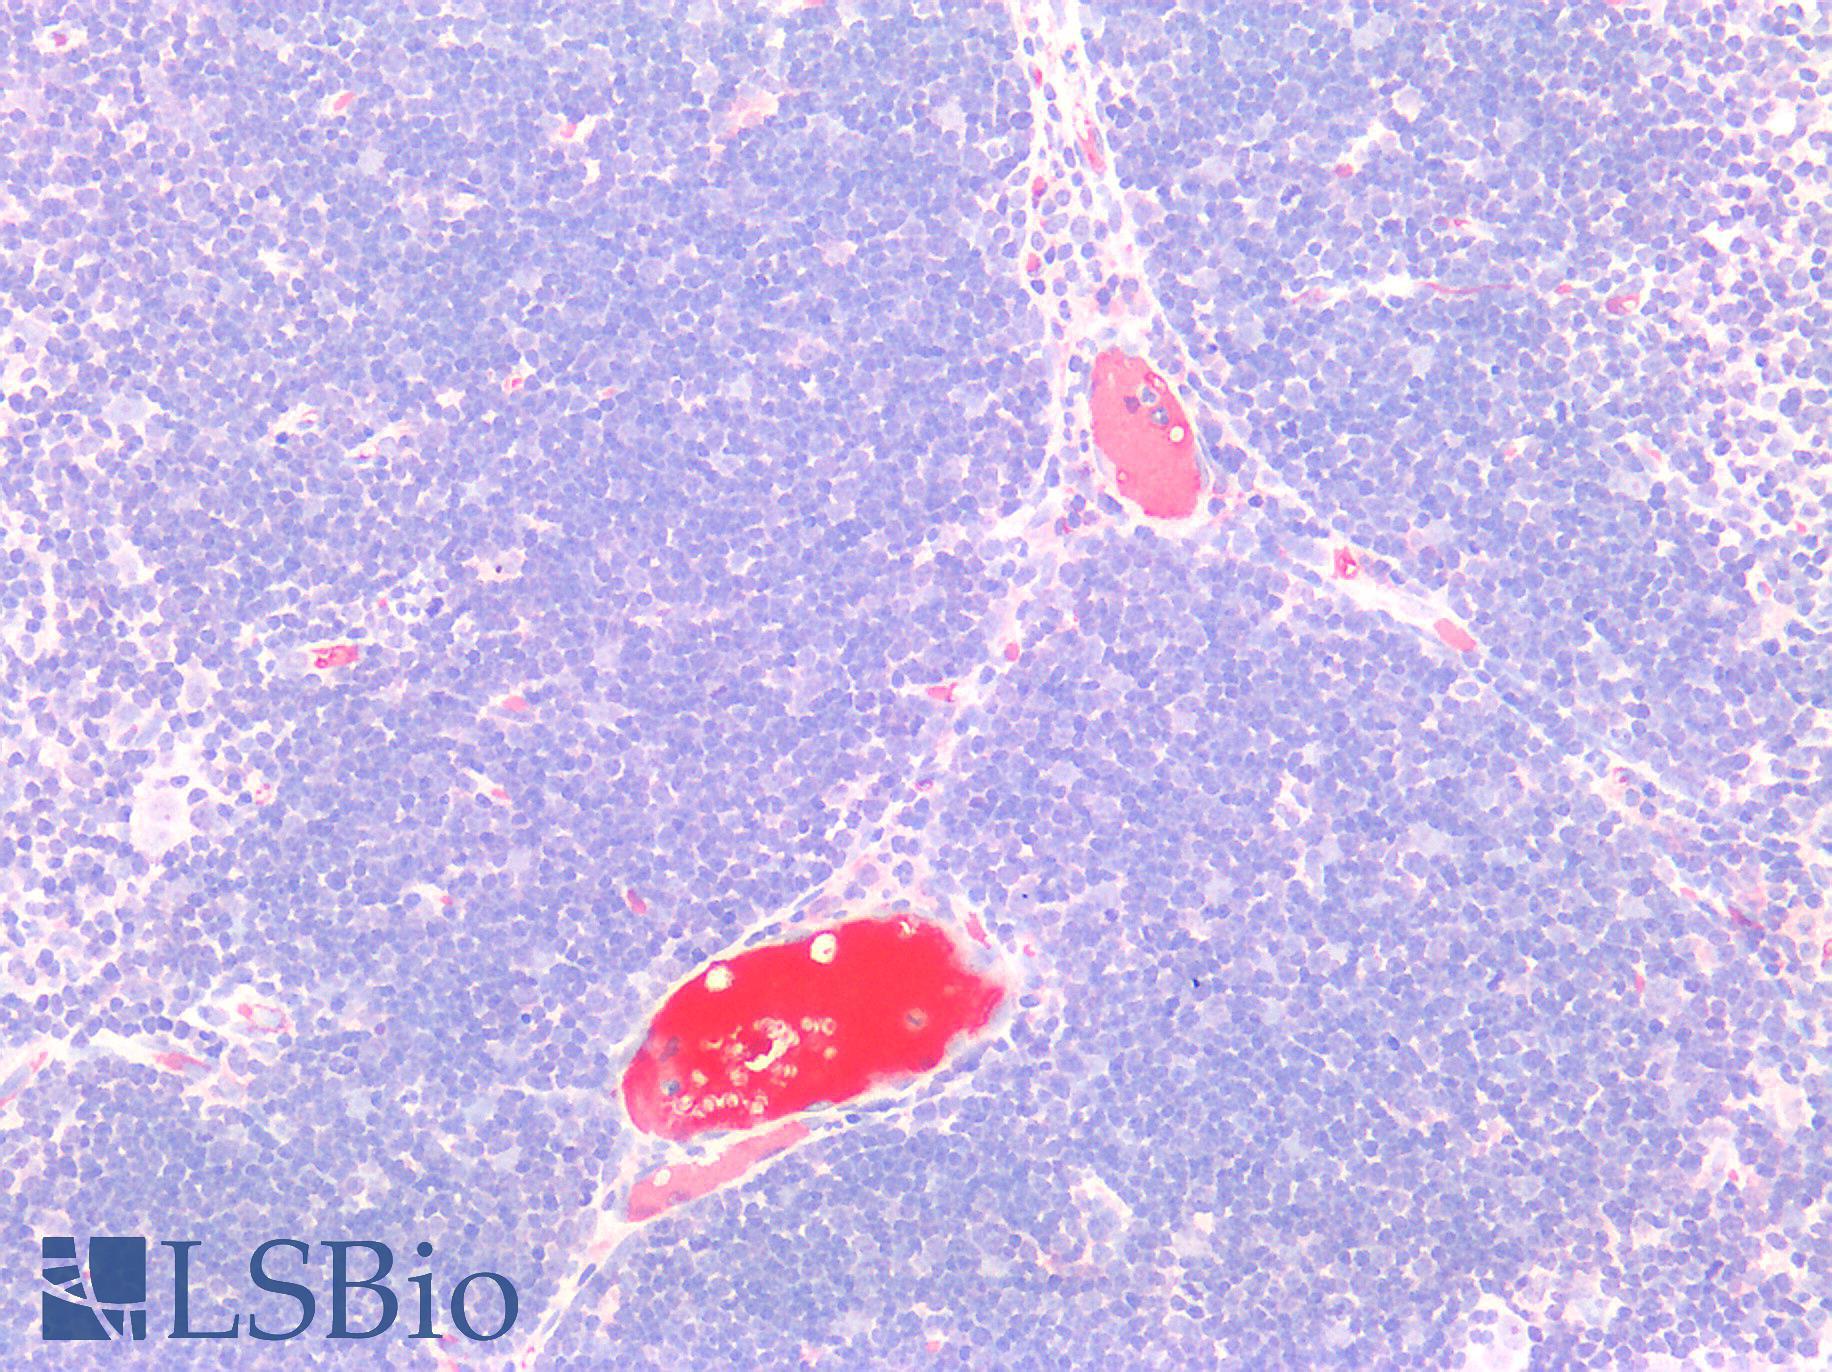 Complement C9 Antibody - Human Thymus: Formalin-Fixed, Paraffin-Embedded (FFPE)